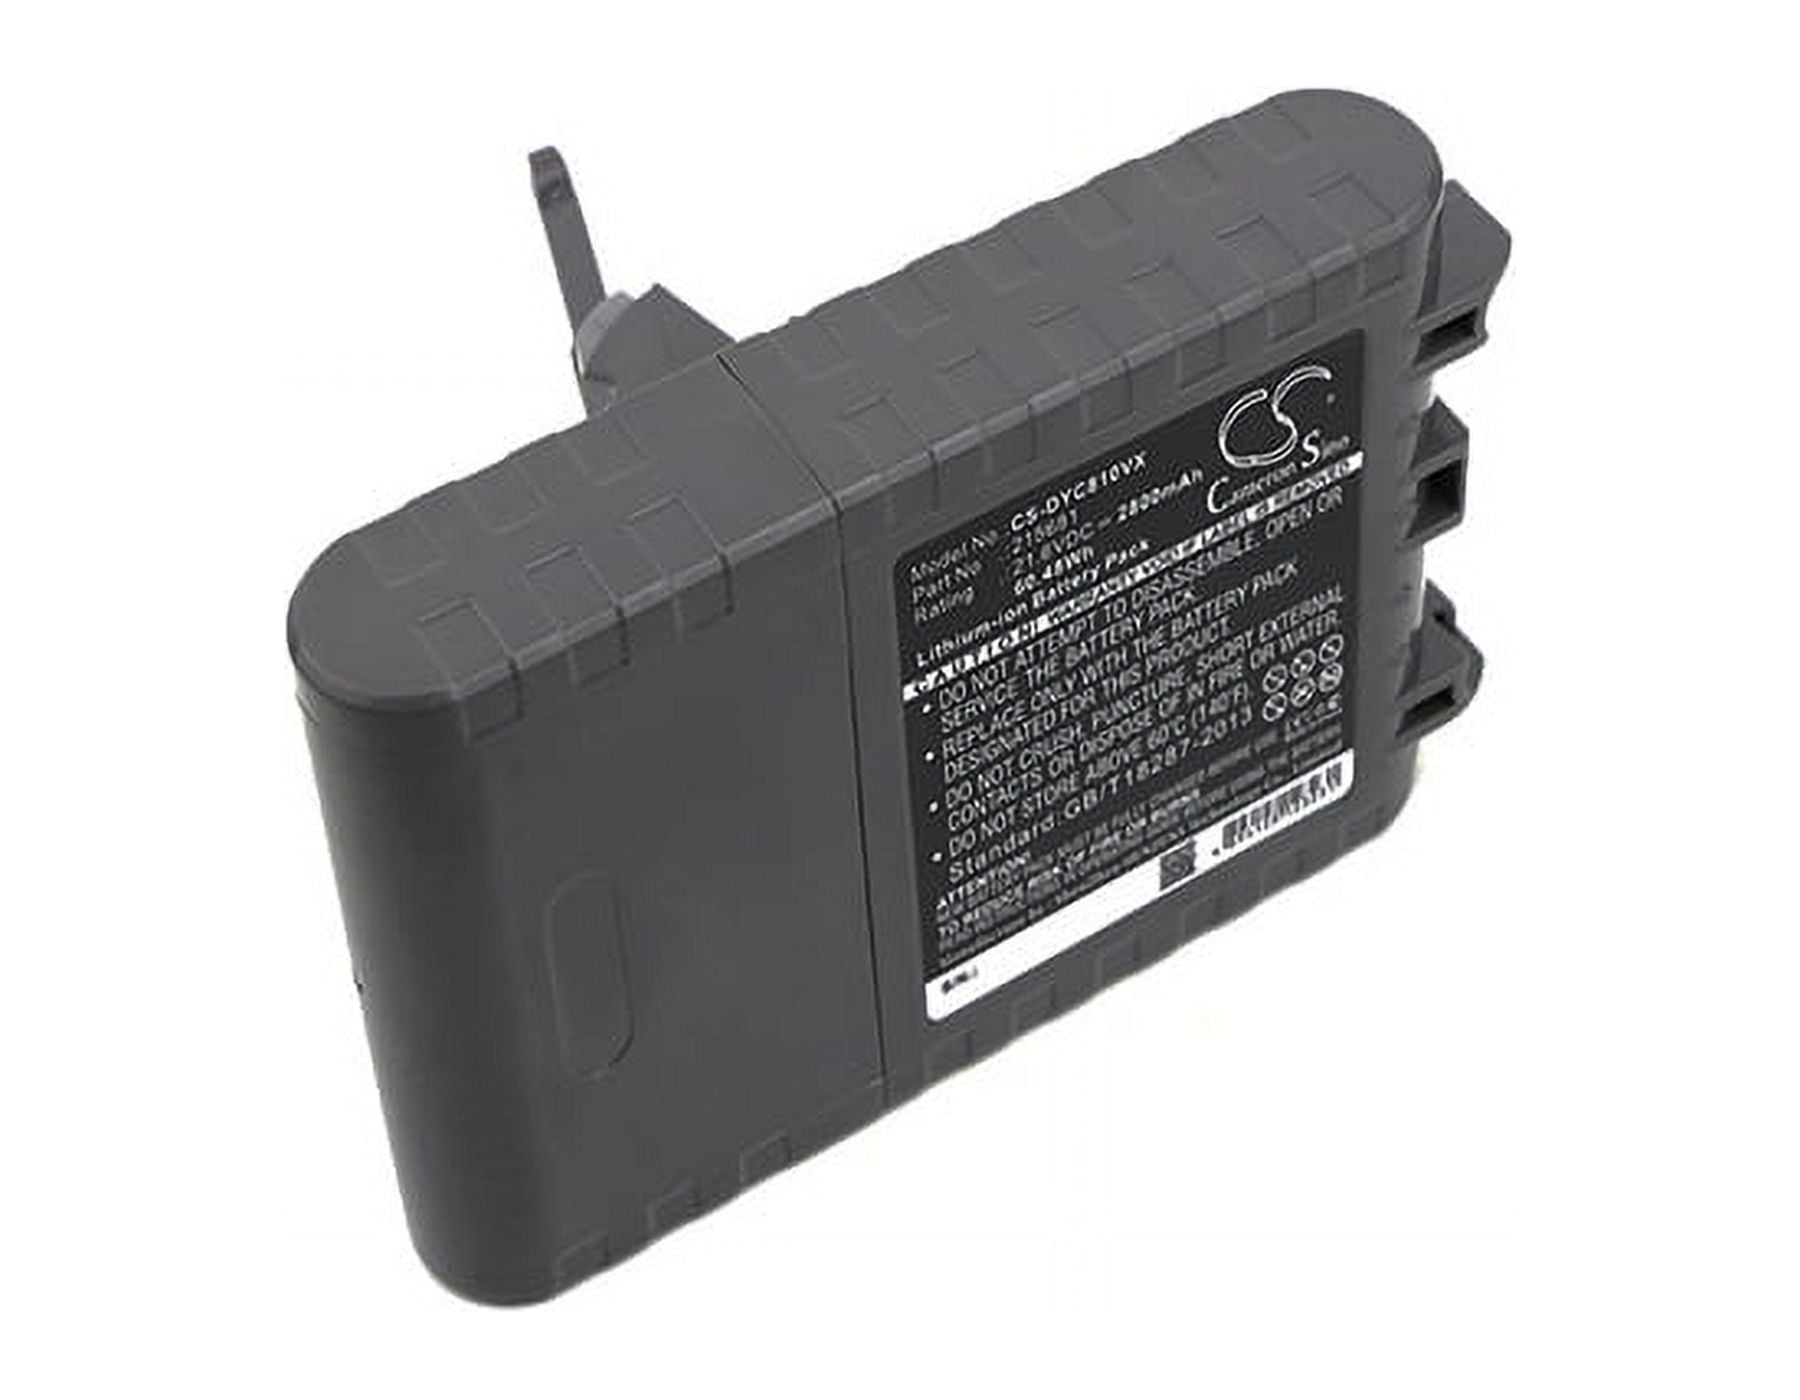 DC21.6V-8 Dyson V8 replacement battery Type E fitment — The Battery World  Shop